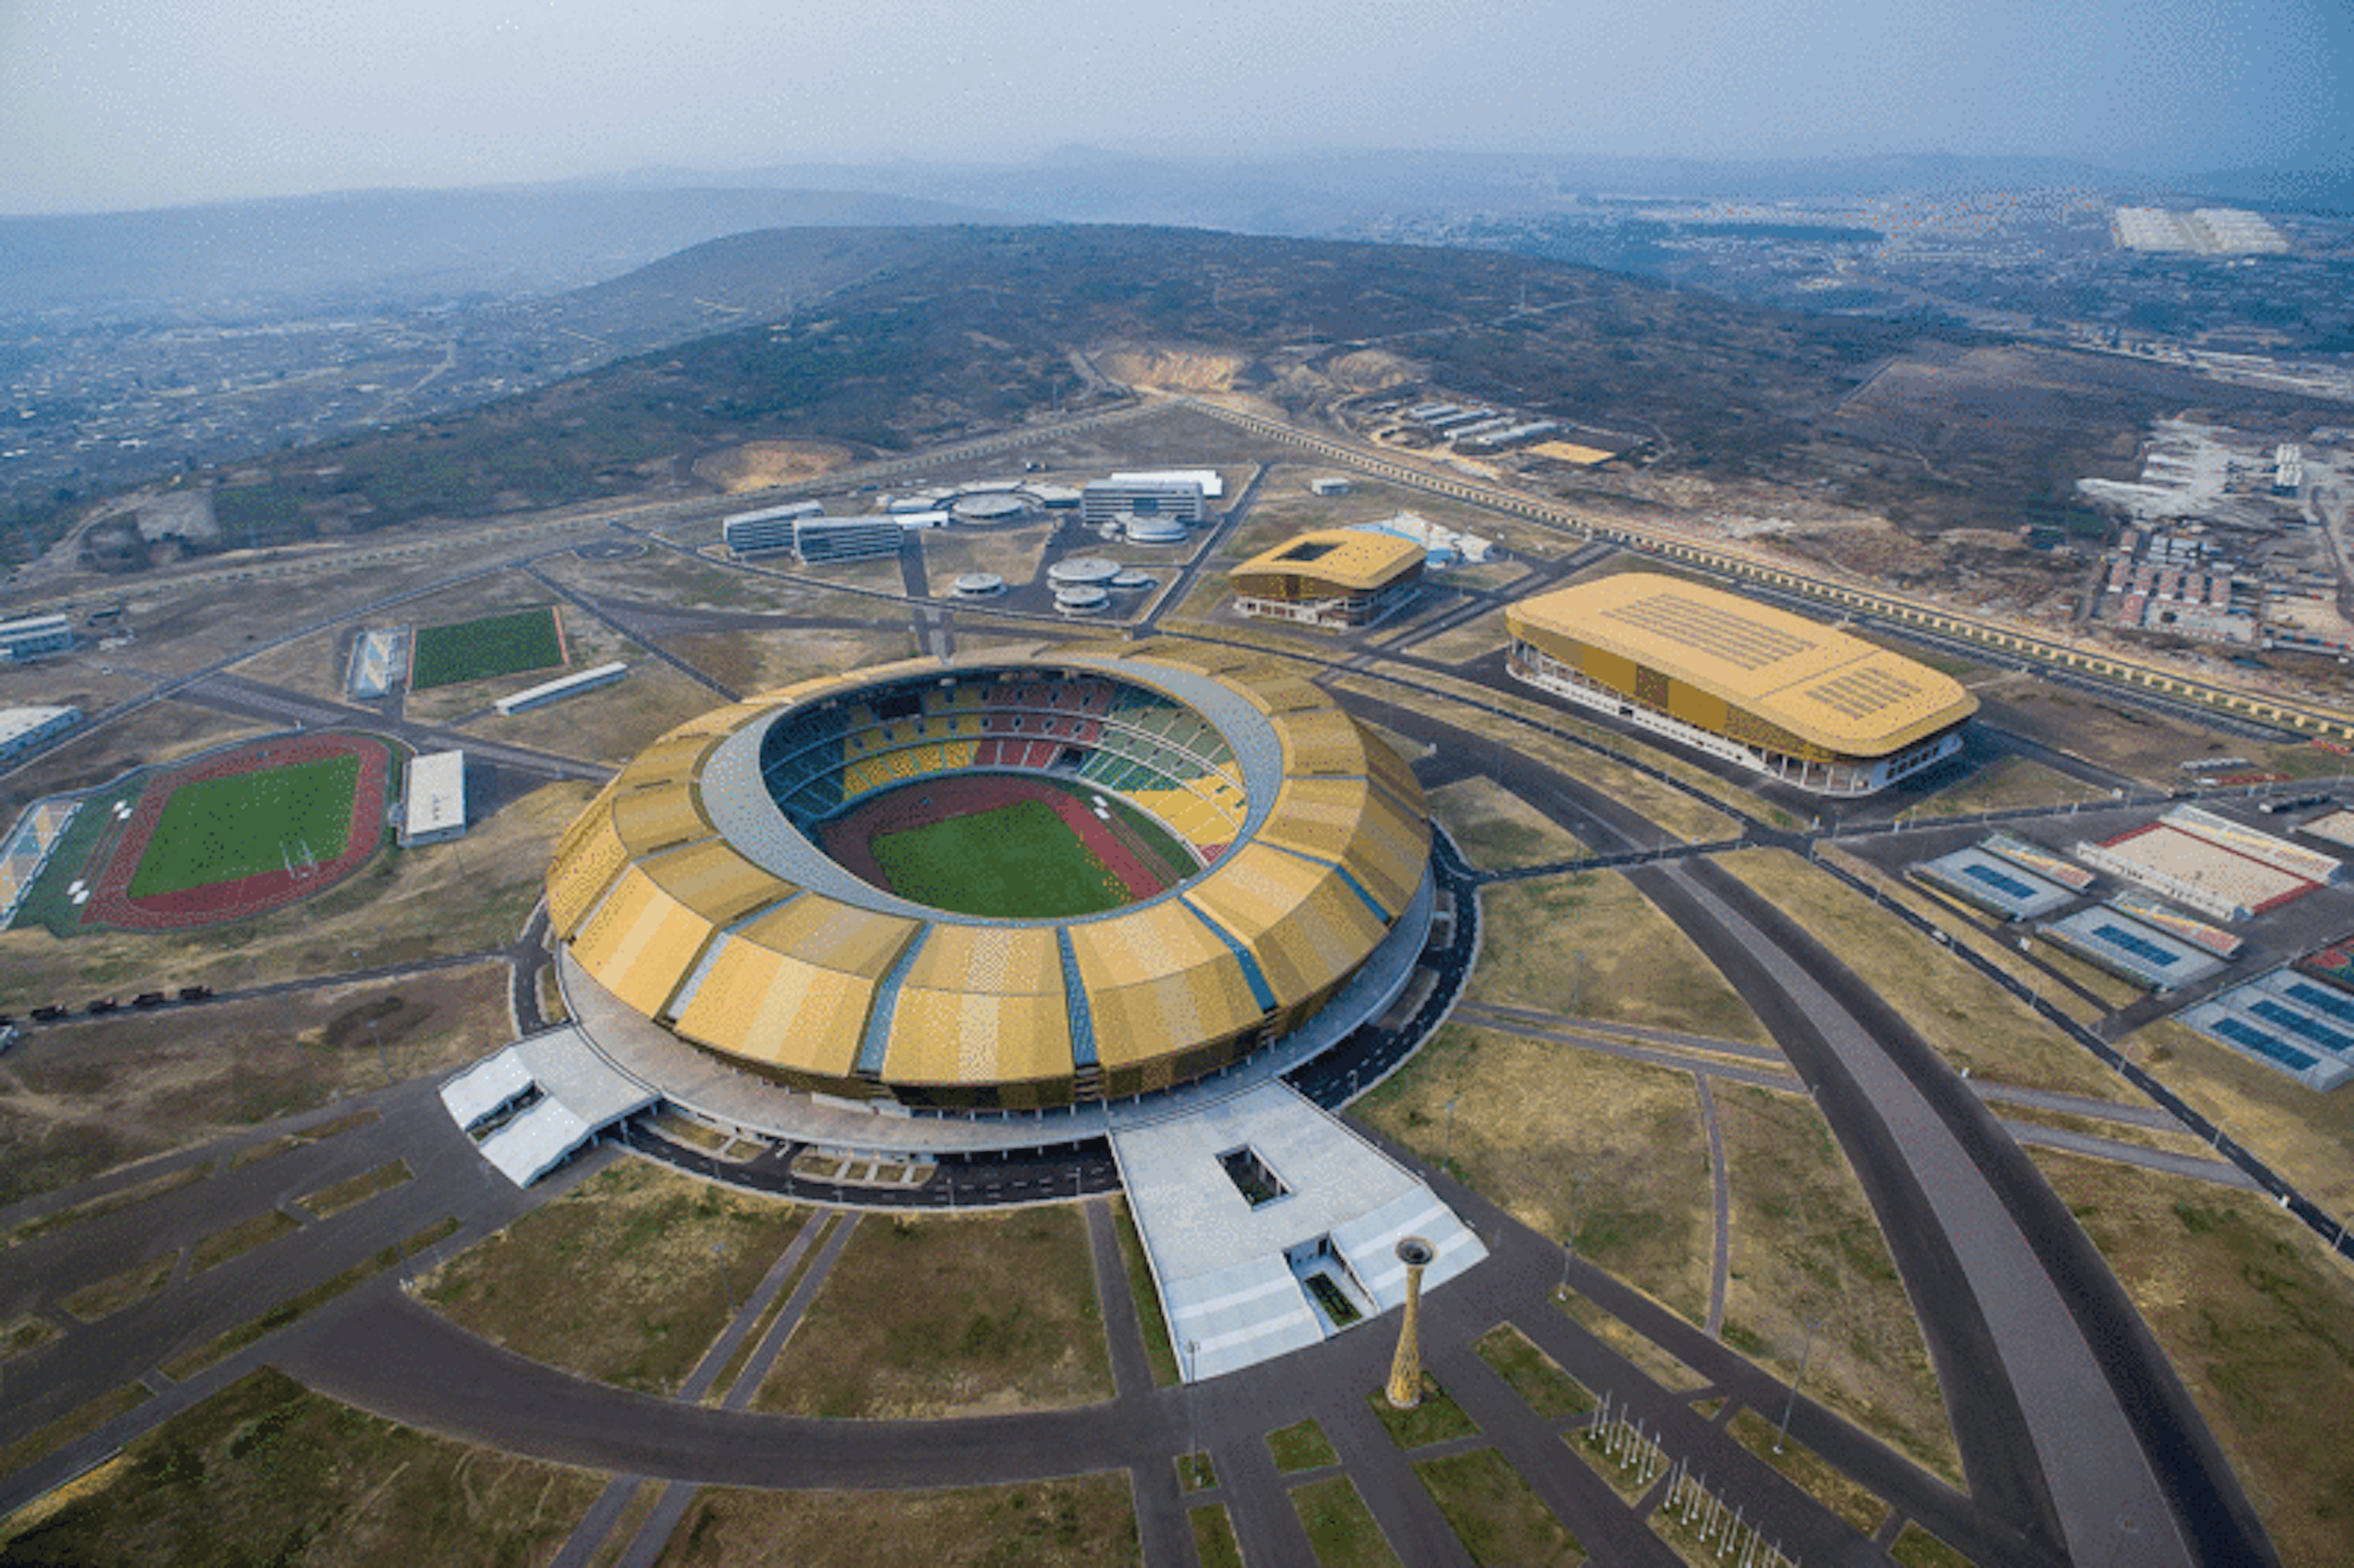 overview of part of the city of brazzaville with a sports stadium in the foreground